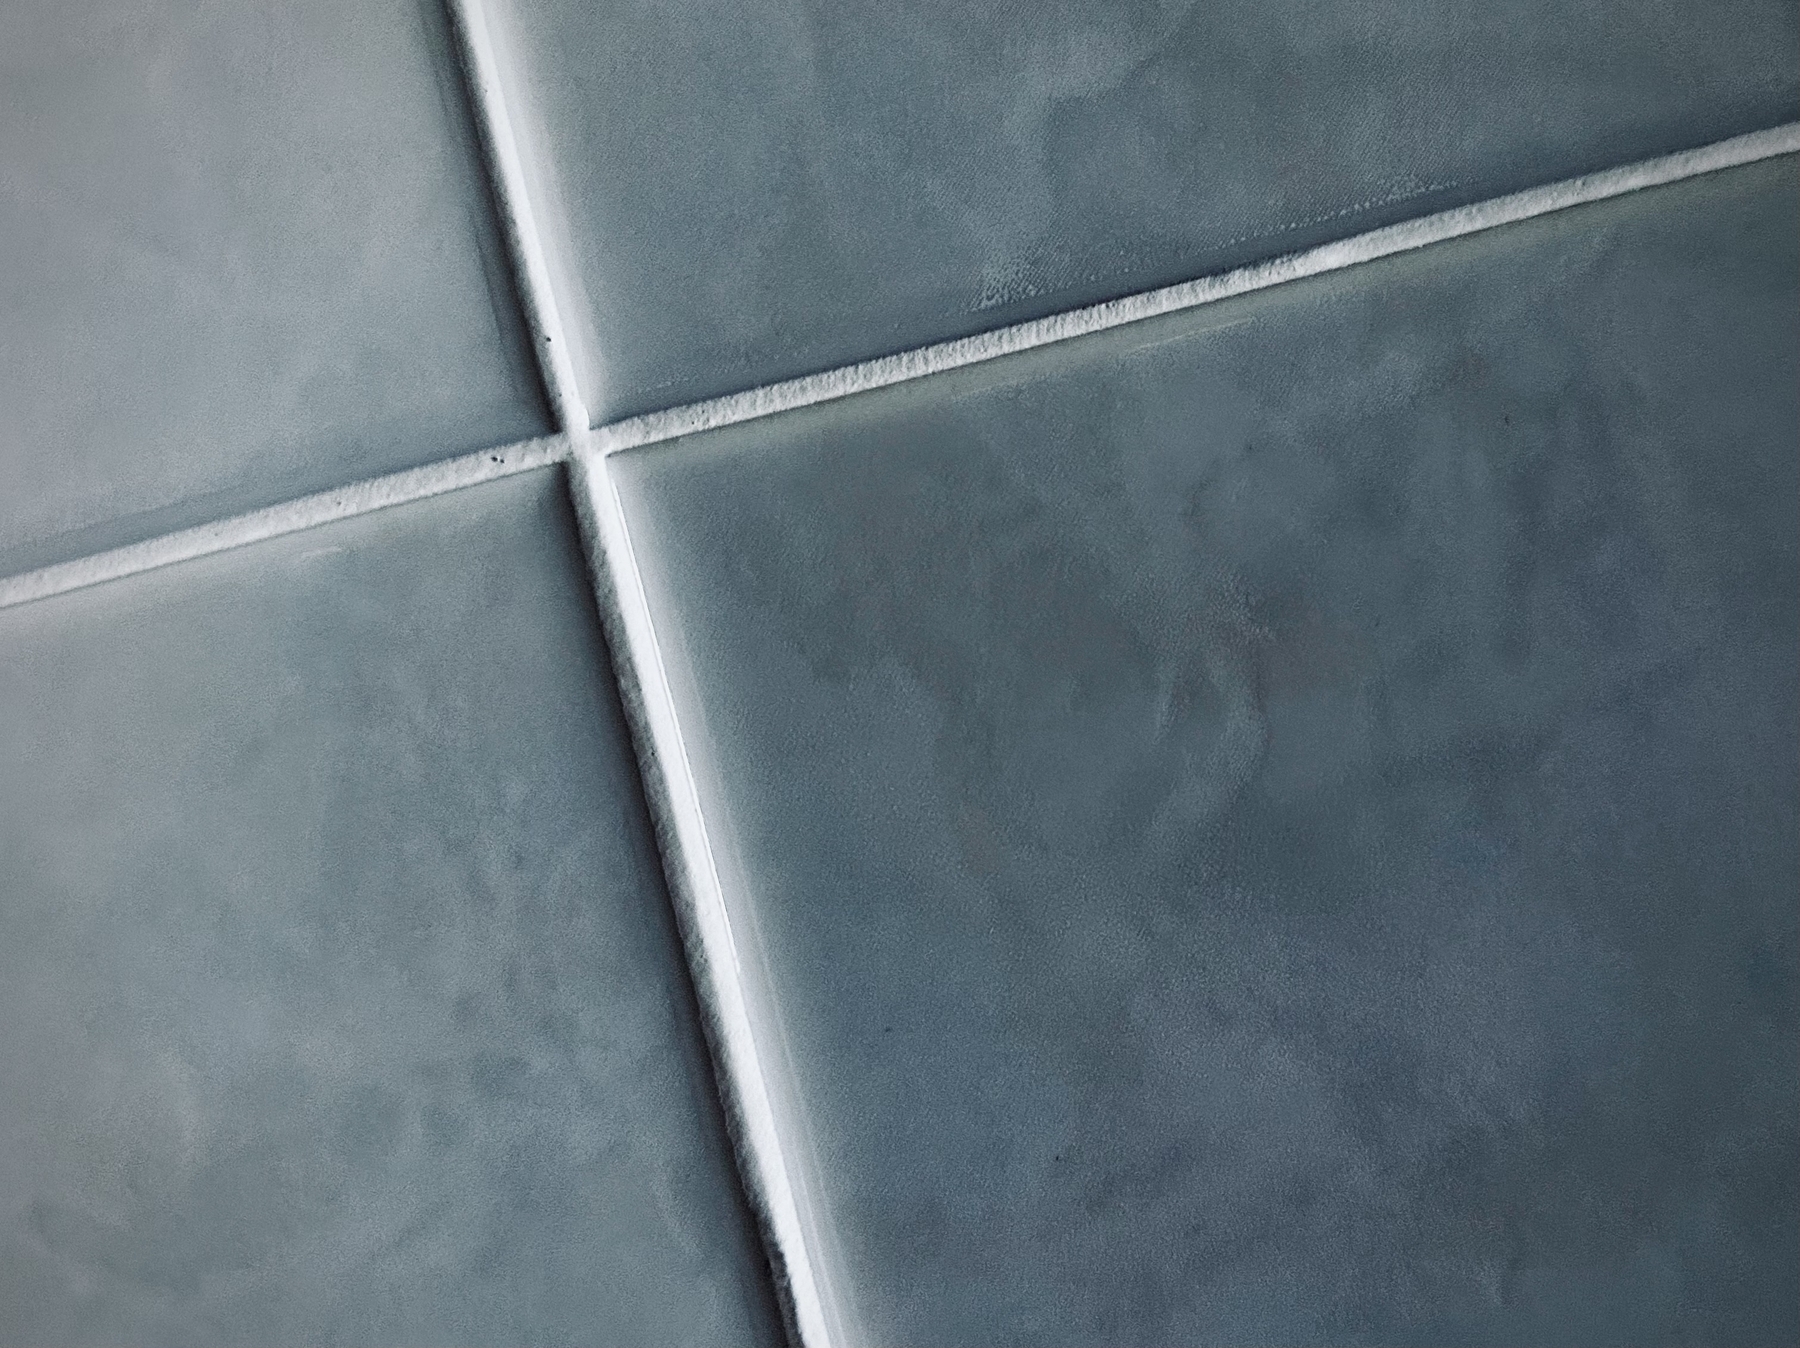 A high contrast close up of the subtle textures in some large white tiles.